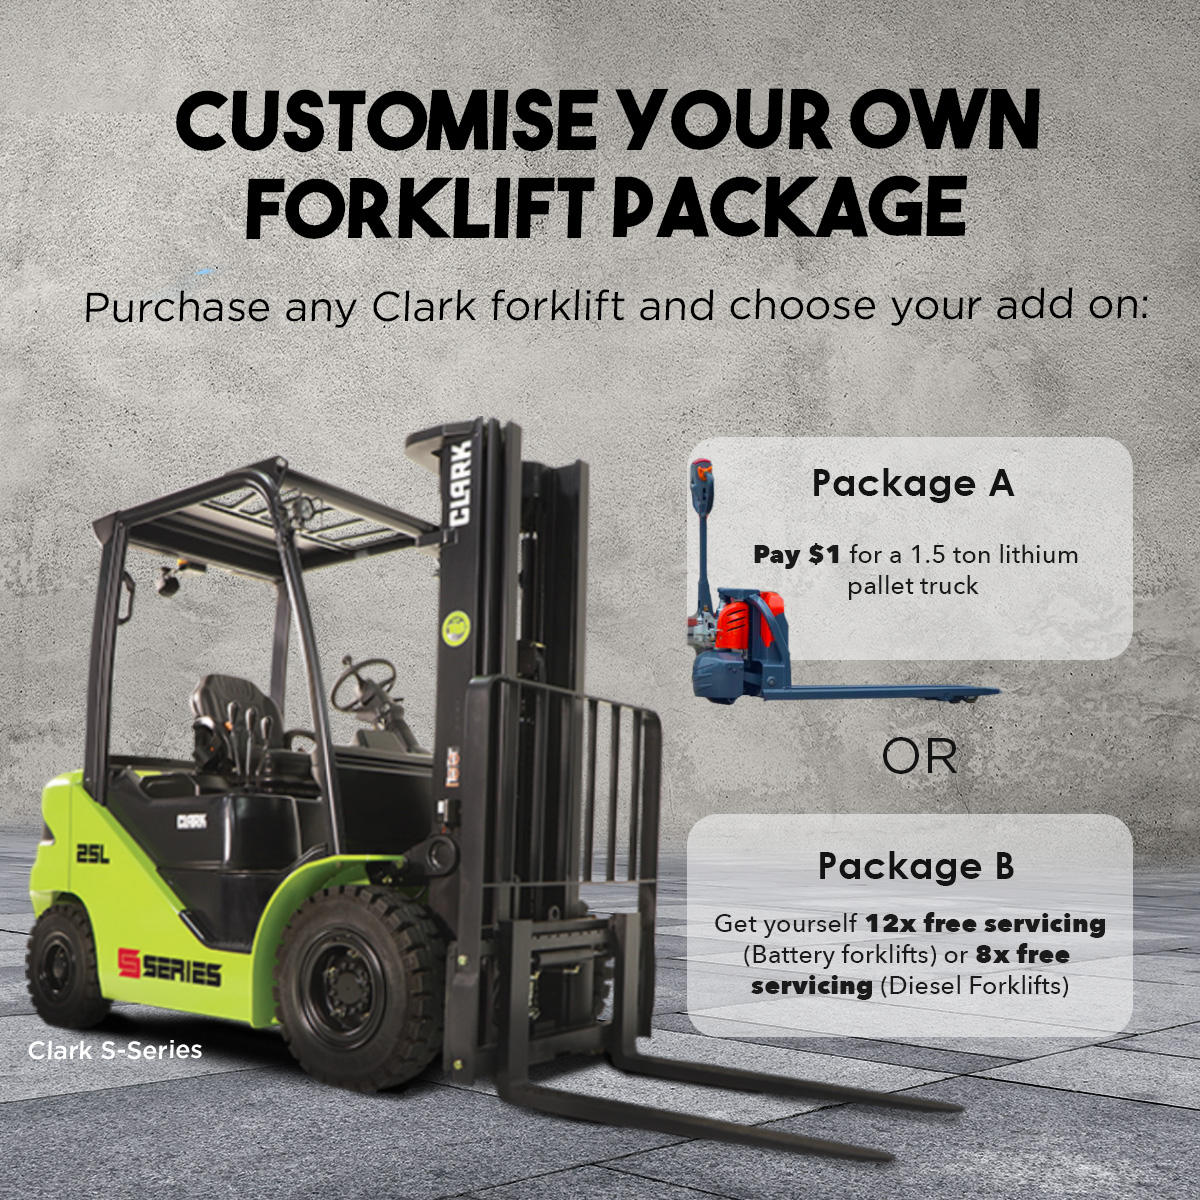 ADD ON BUNDLE PROMOTION WITH ANY CLARK FORKLIFT PURCHASED!